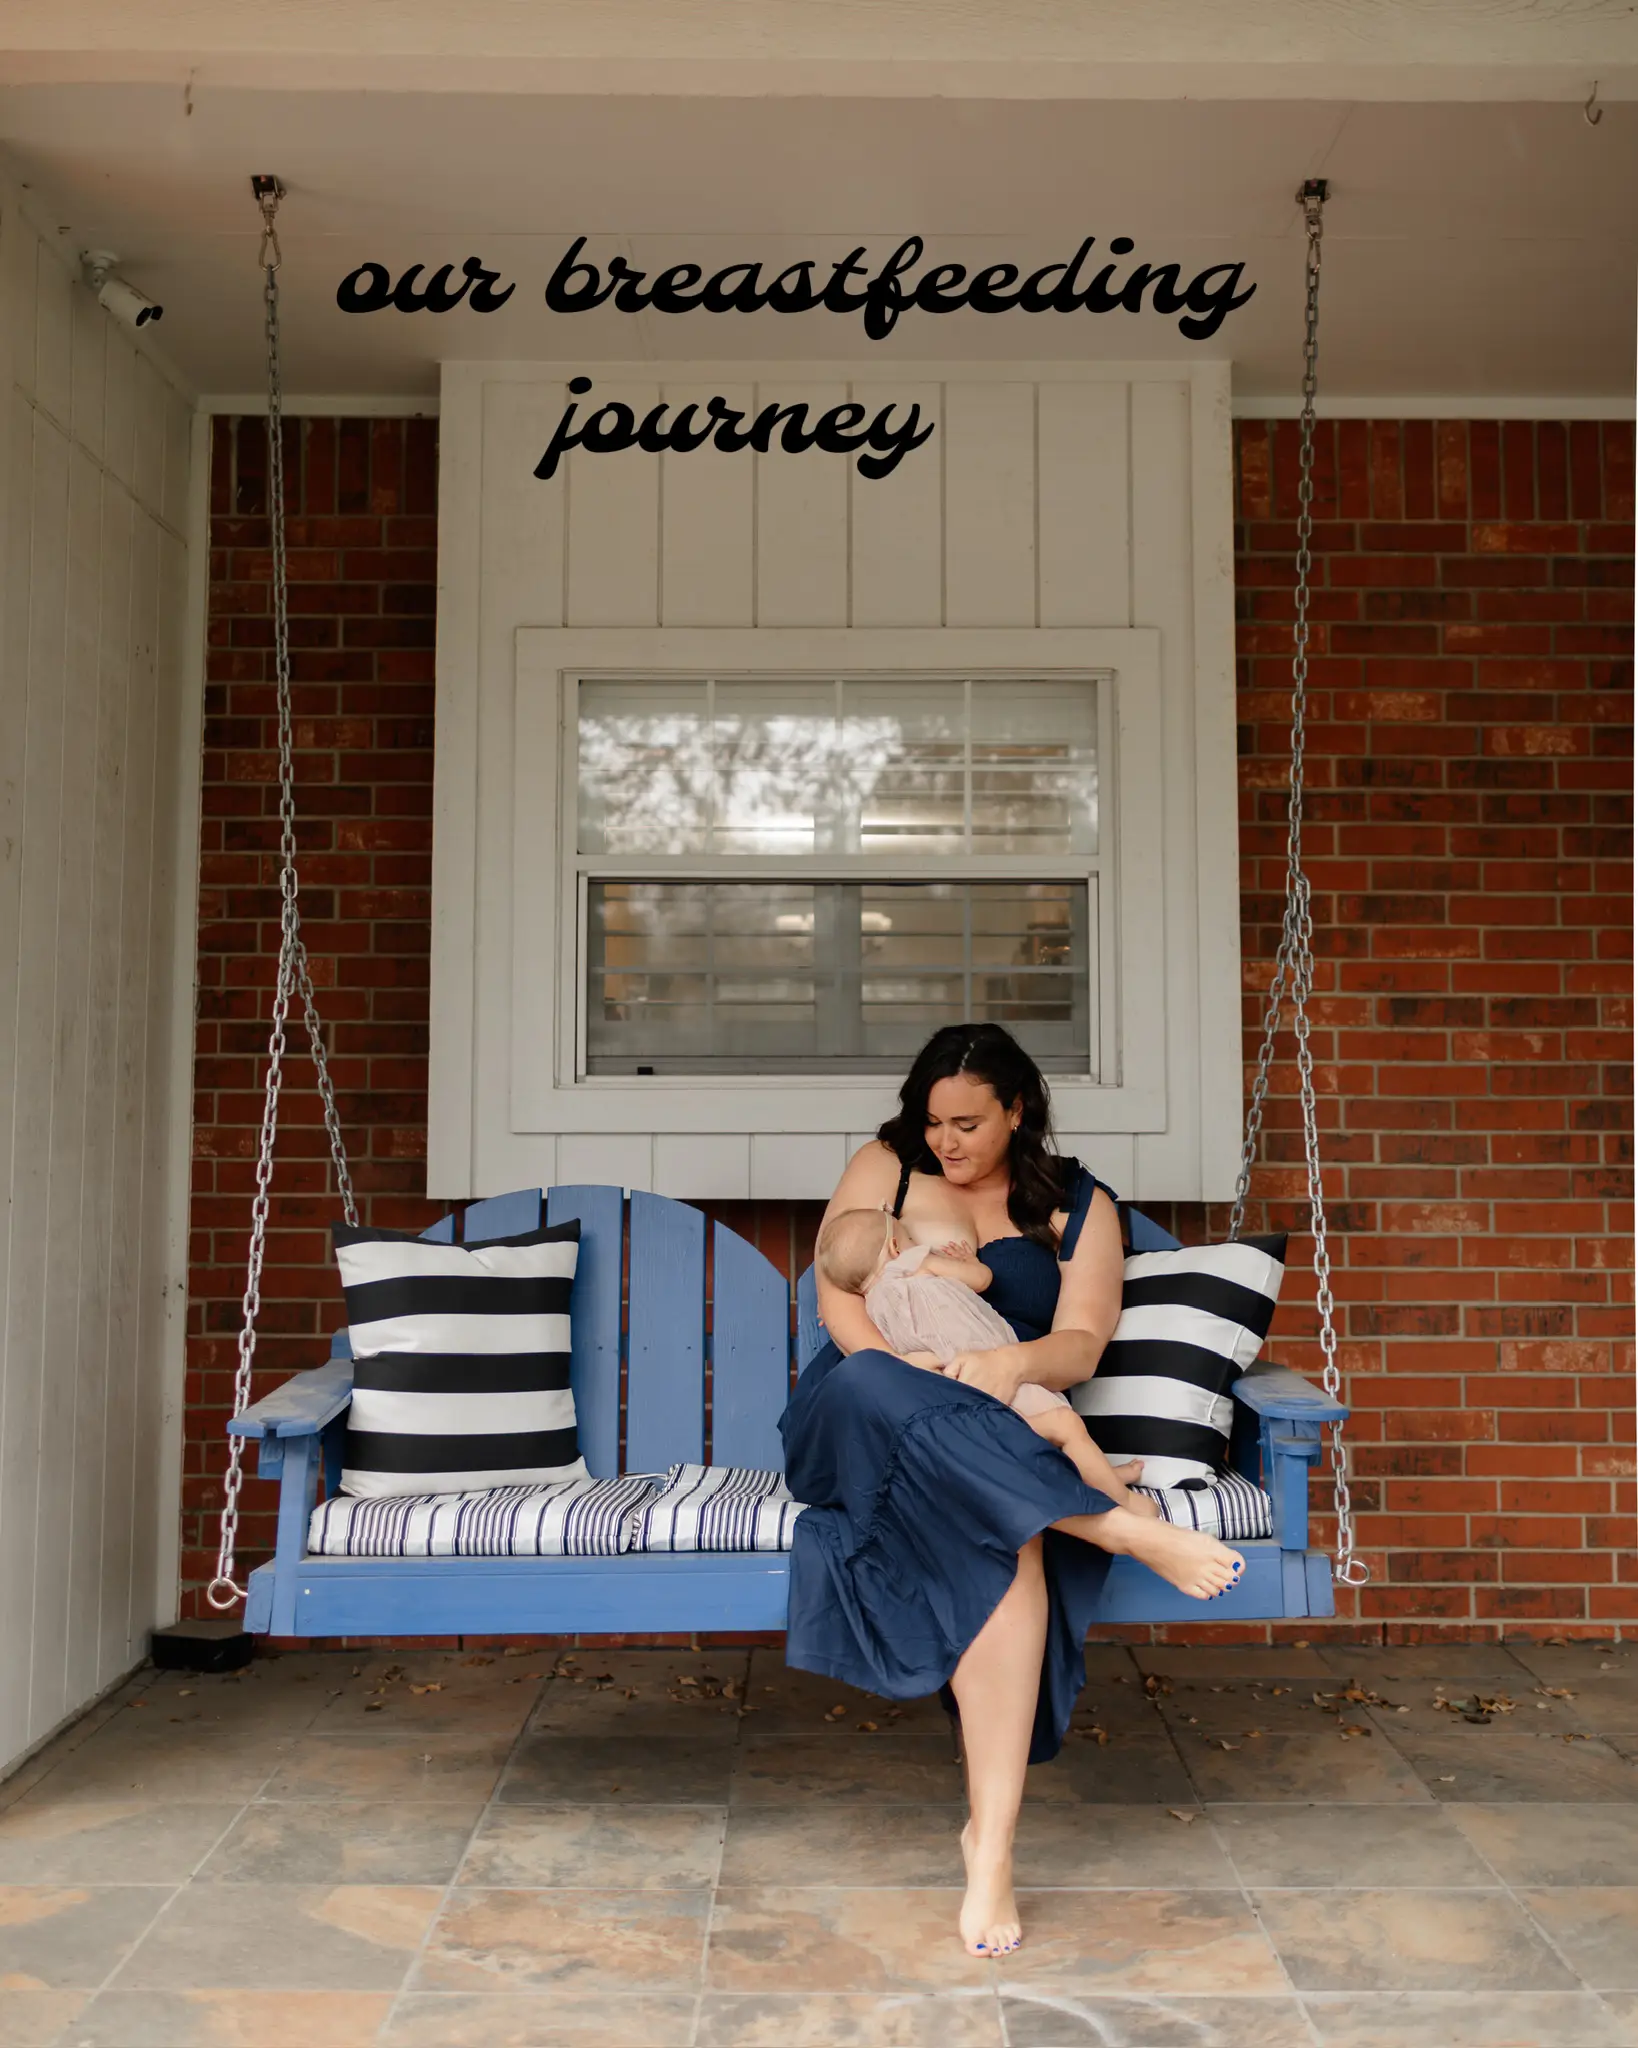 our breastfeeding journey, Gallery posted by Macie Trotter